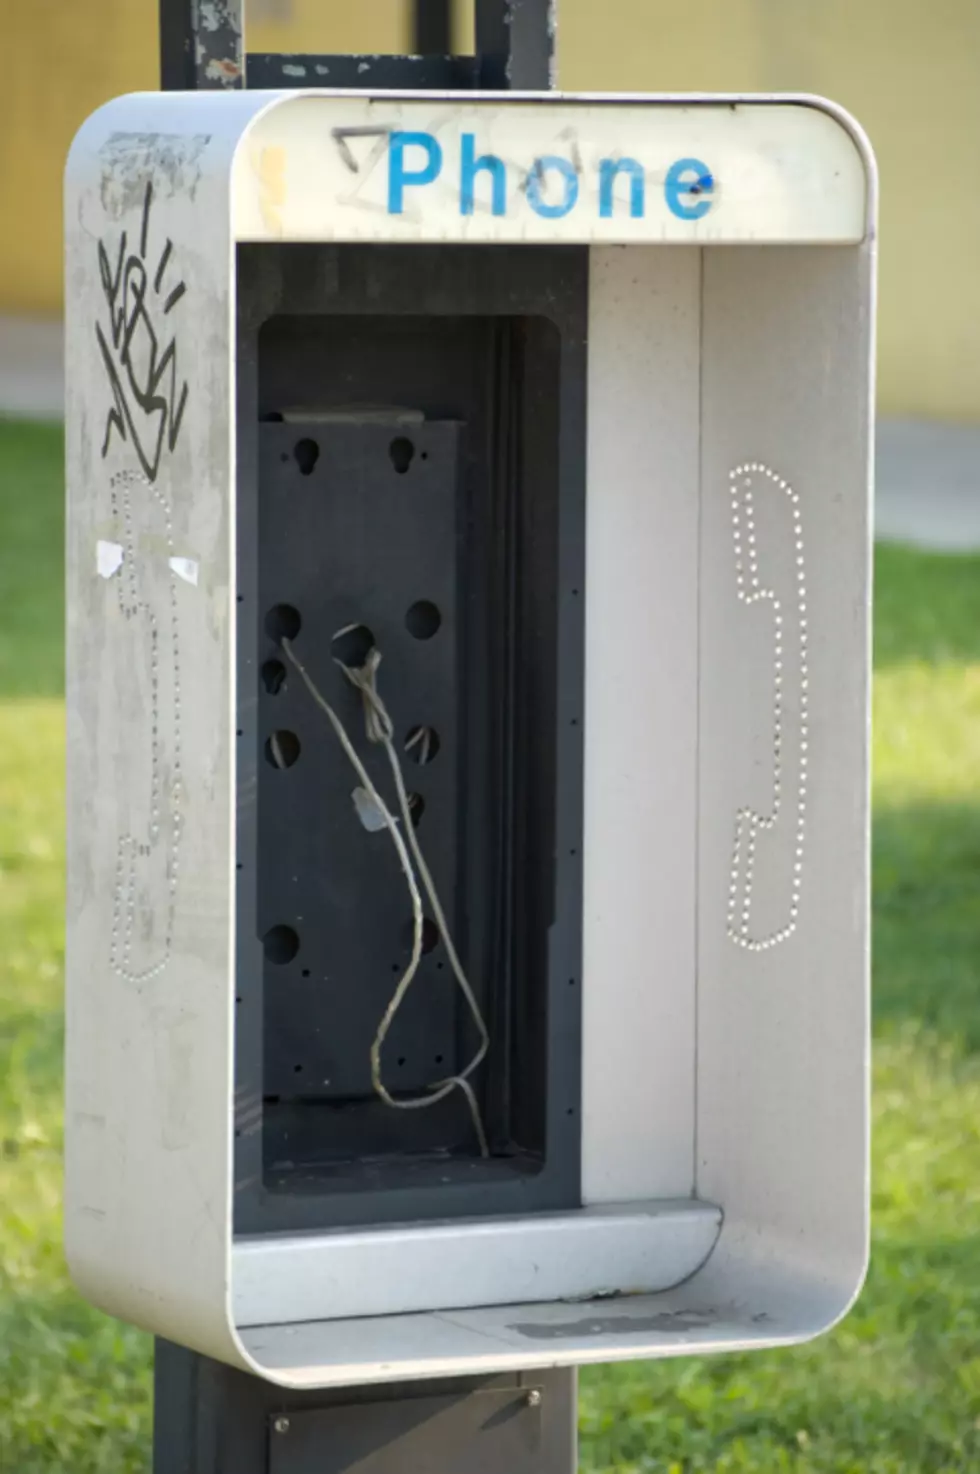 Where Have All The Payphones Gone?